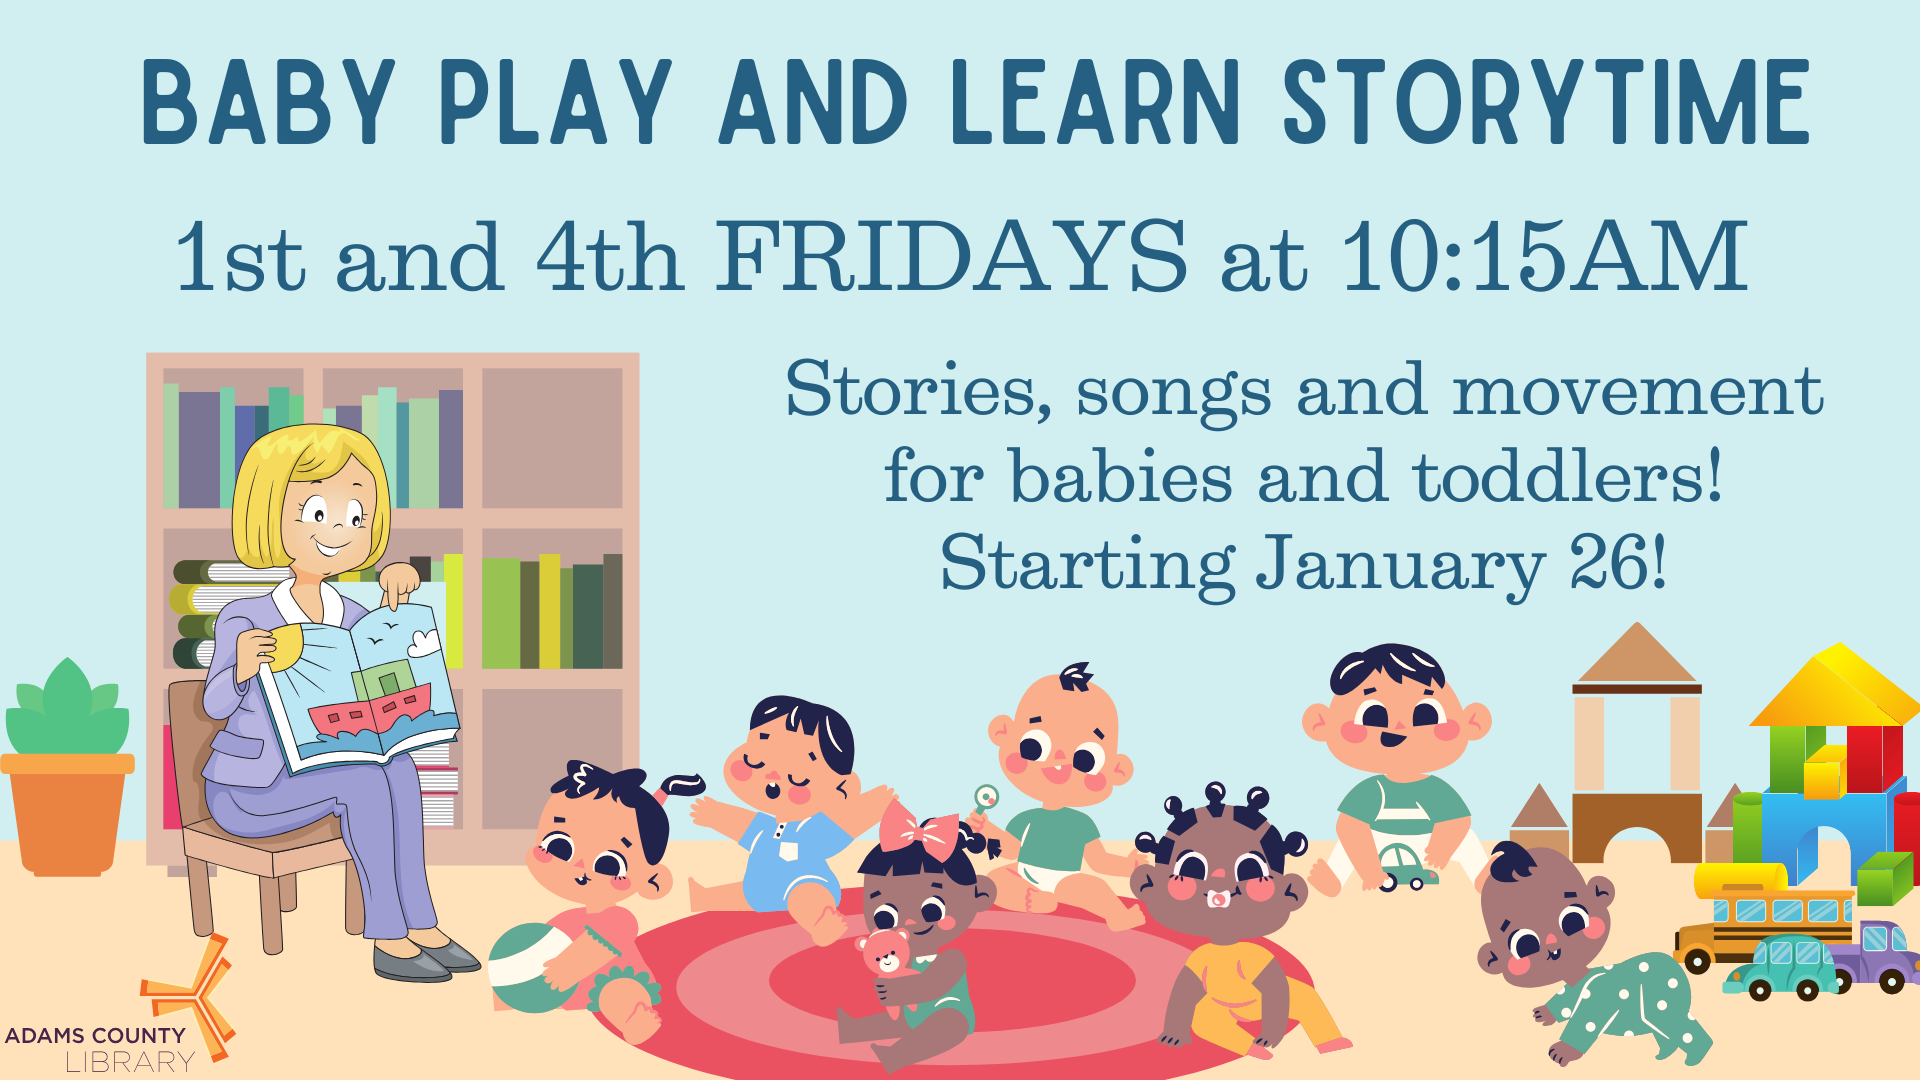 Baby Play and Learn Storytime 1st and 4th Fridays at 10:15 AM starting January 26th